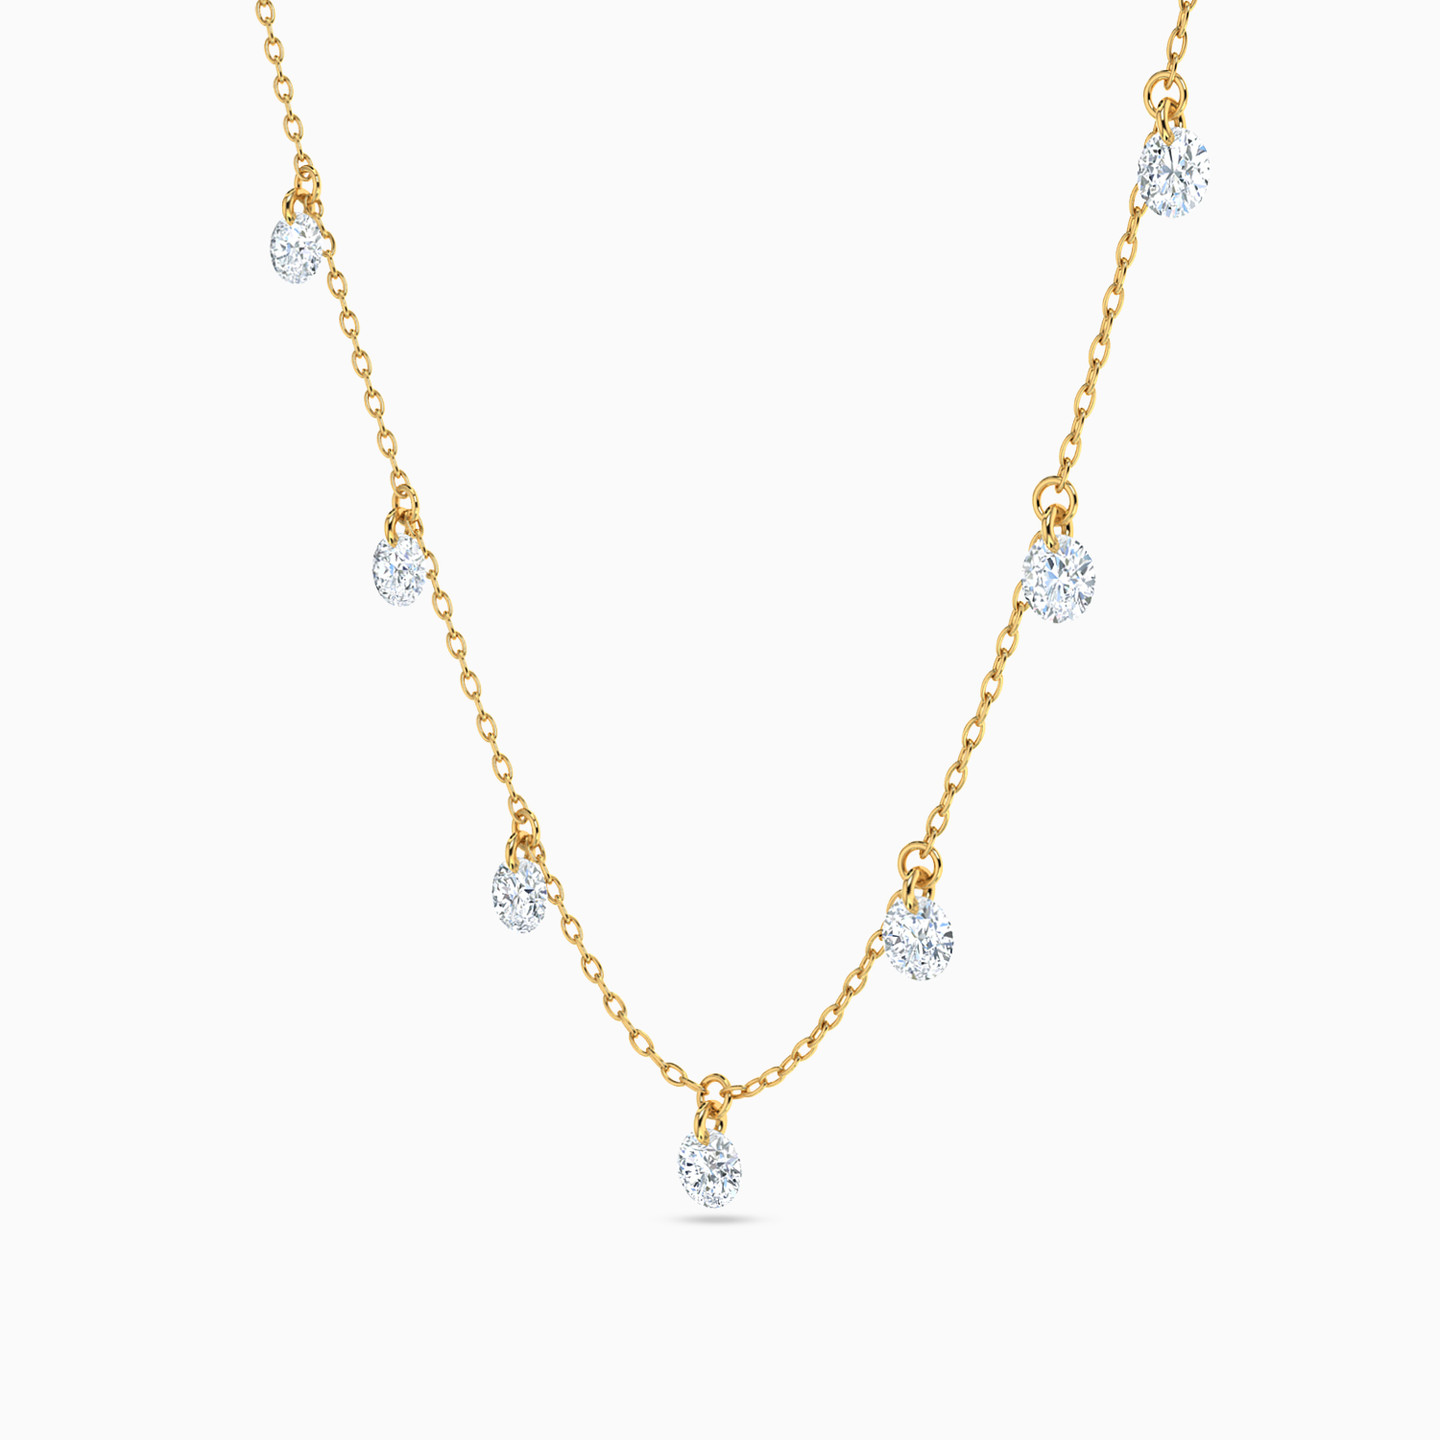 18K Gold Cubic Zirconia Chain Necklace - 2